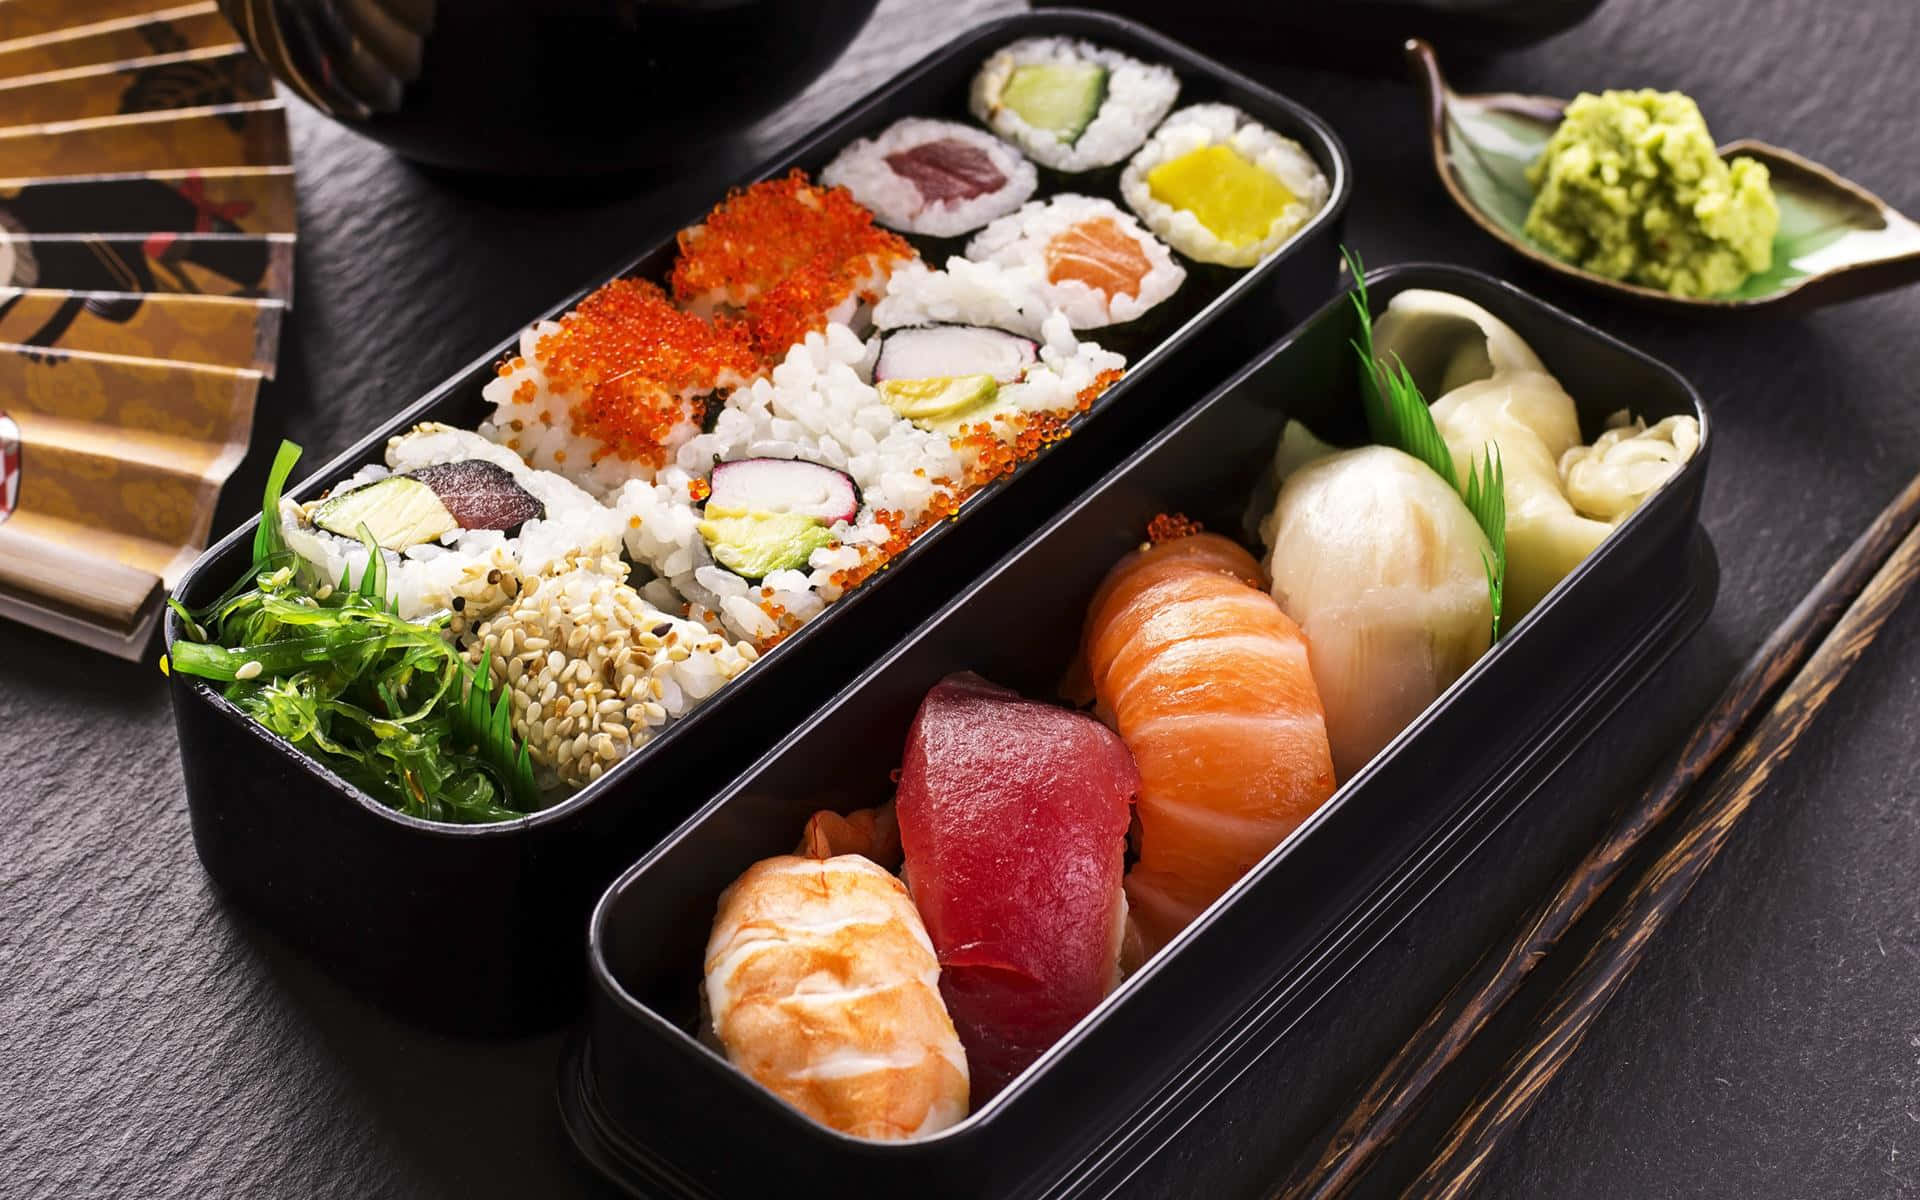 A beautifully presented sushi platter on a wooden table with chopsticks